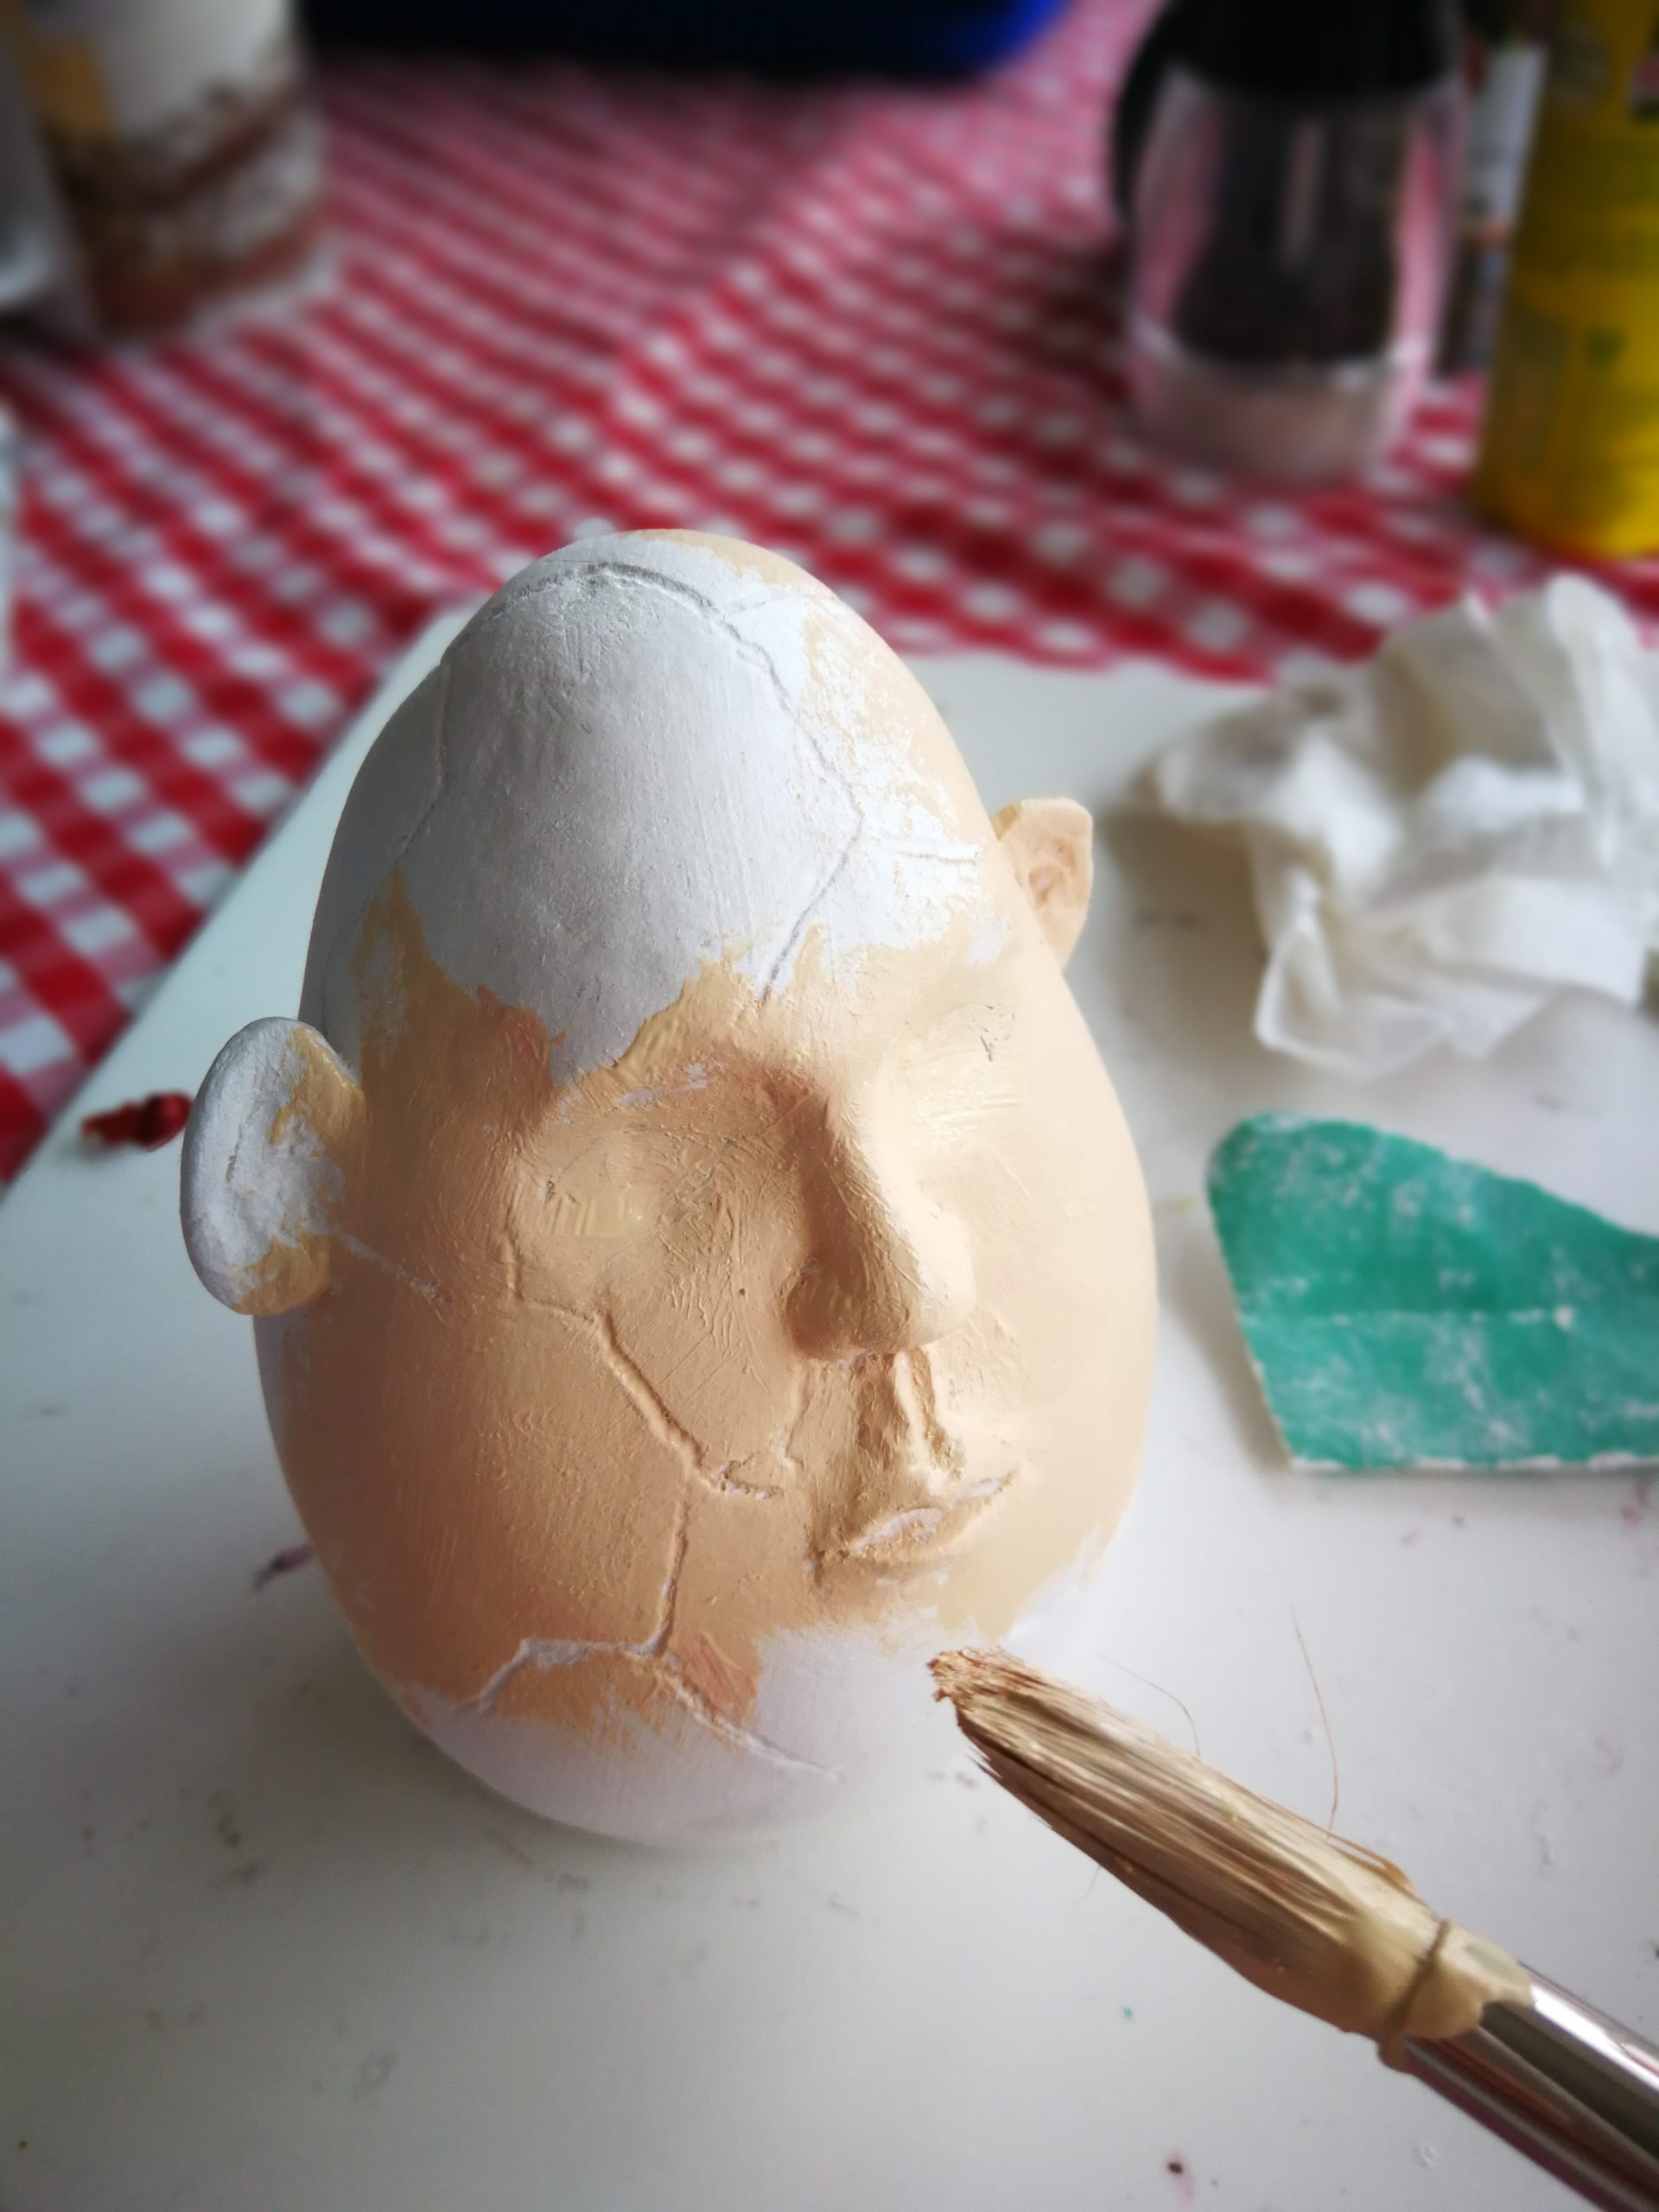 Humpty being painted